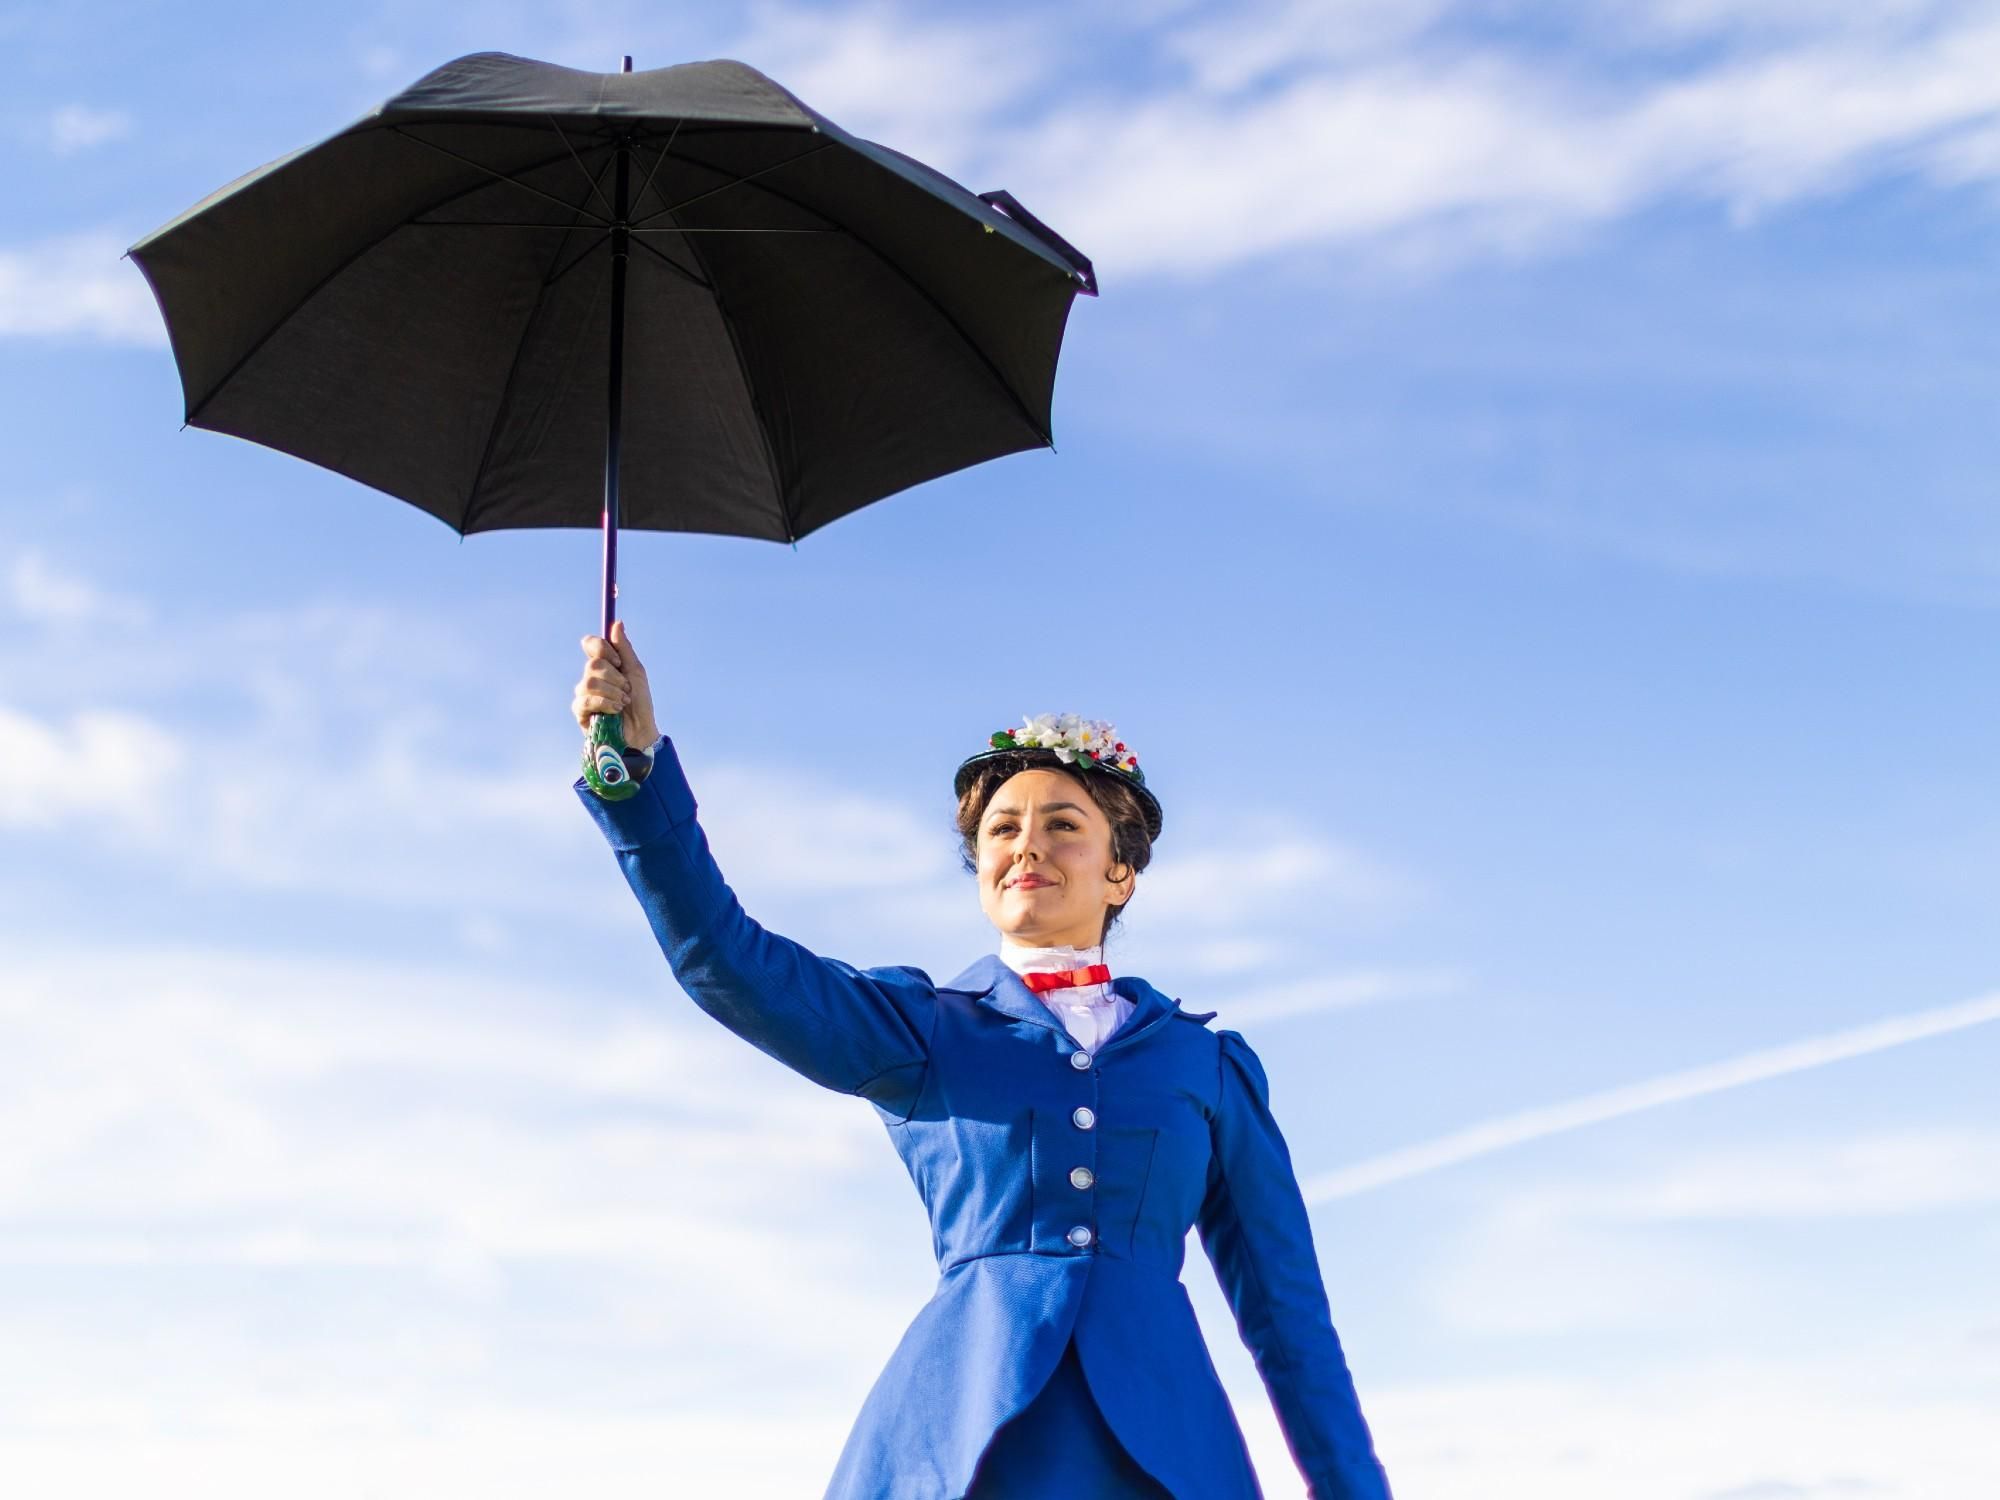 Theatre Under The Stars presents Mary Poppins